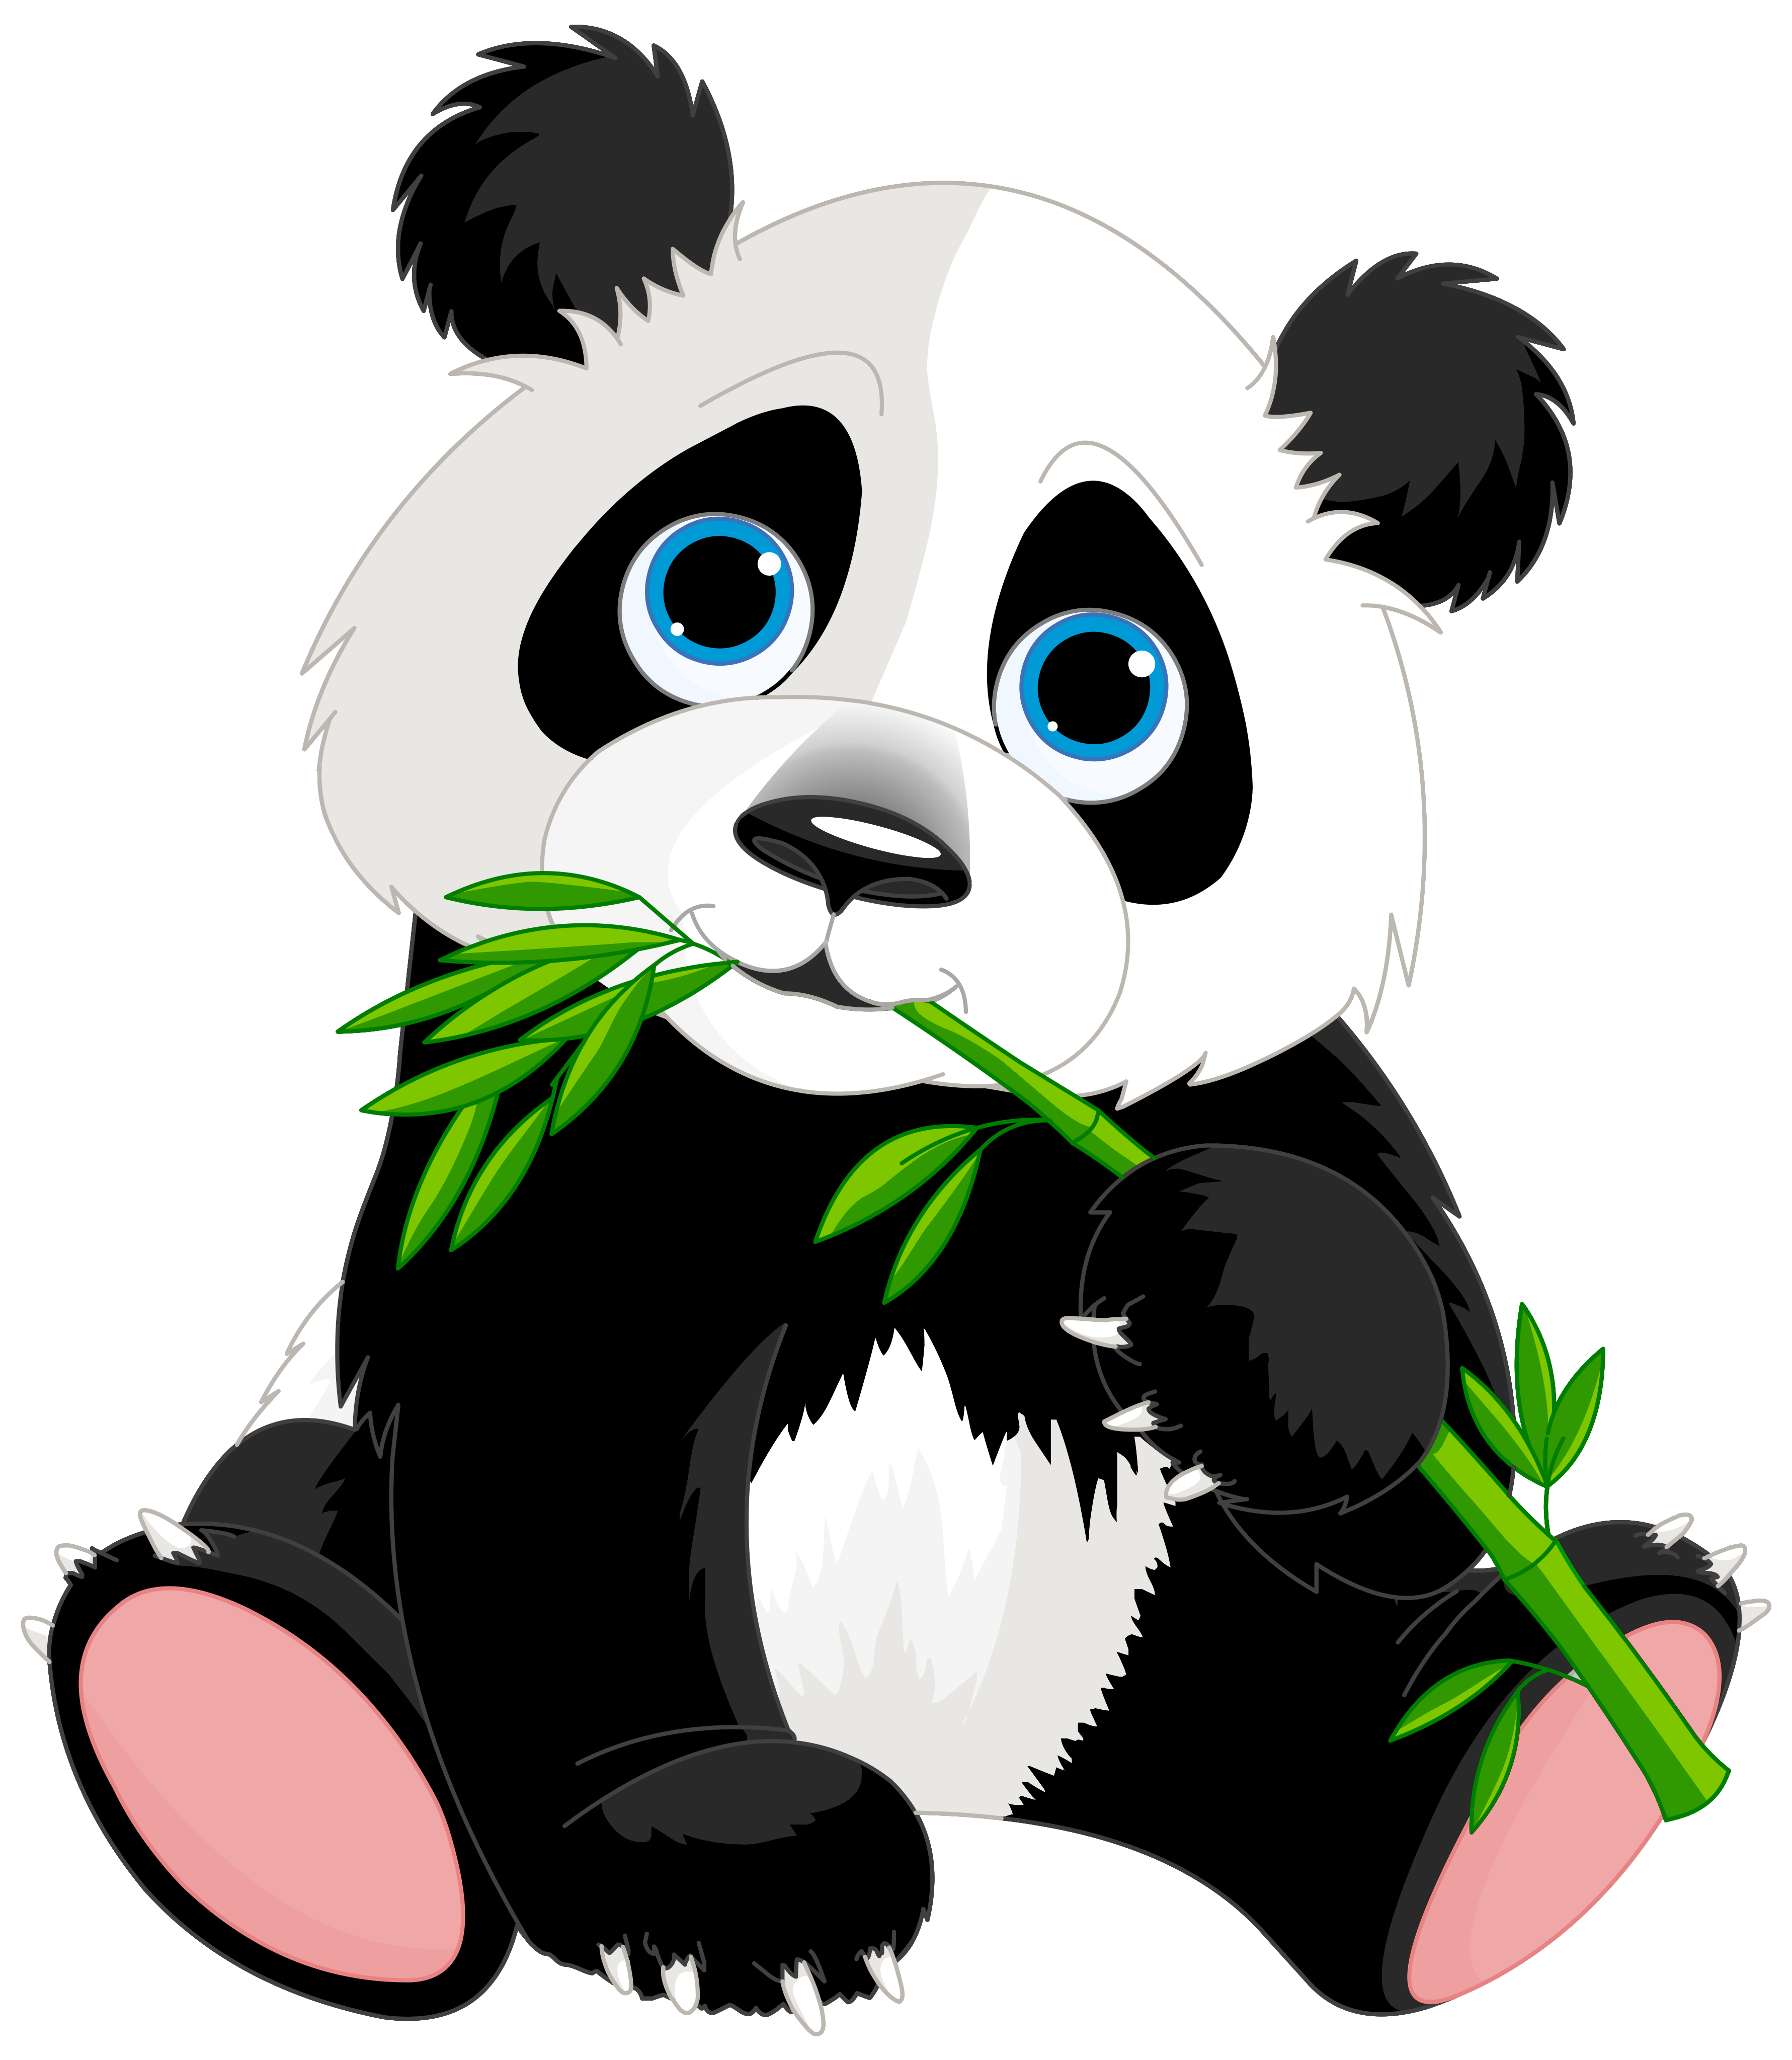 Free Endangered Animals Cliparts, Download Free Clip Art.